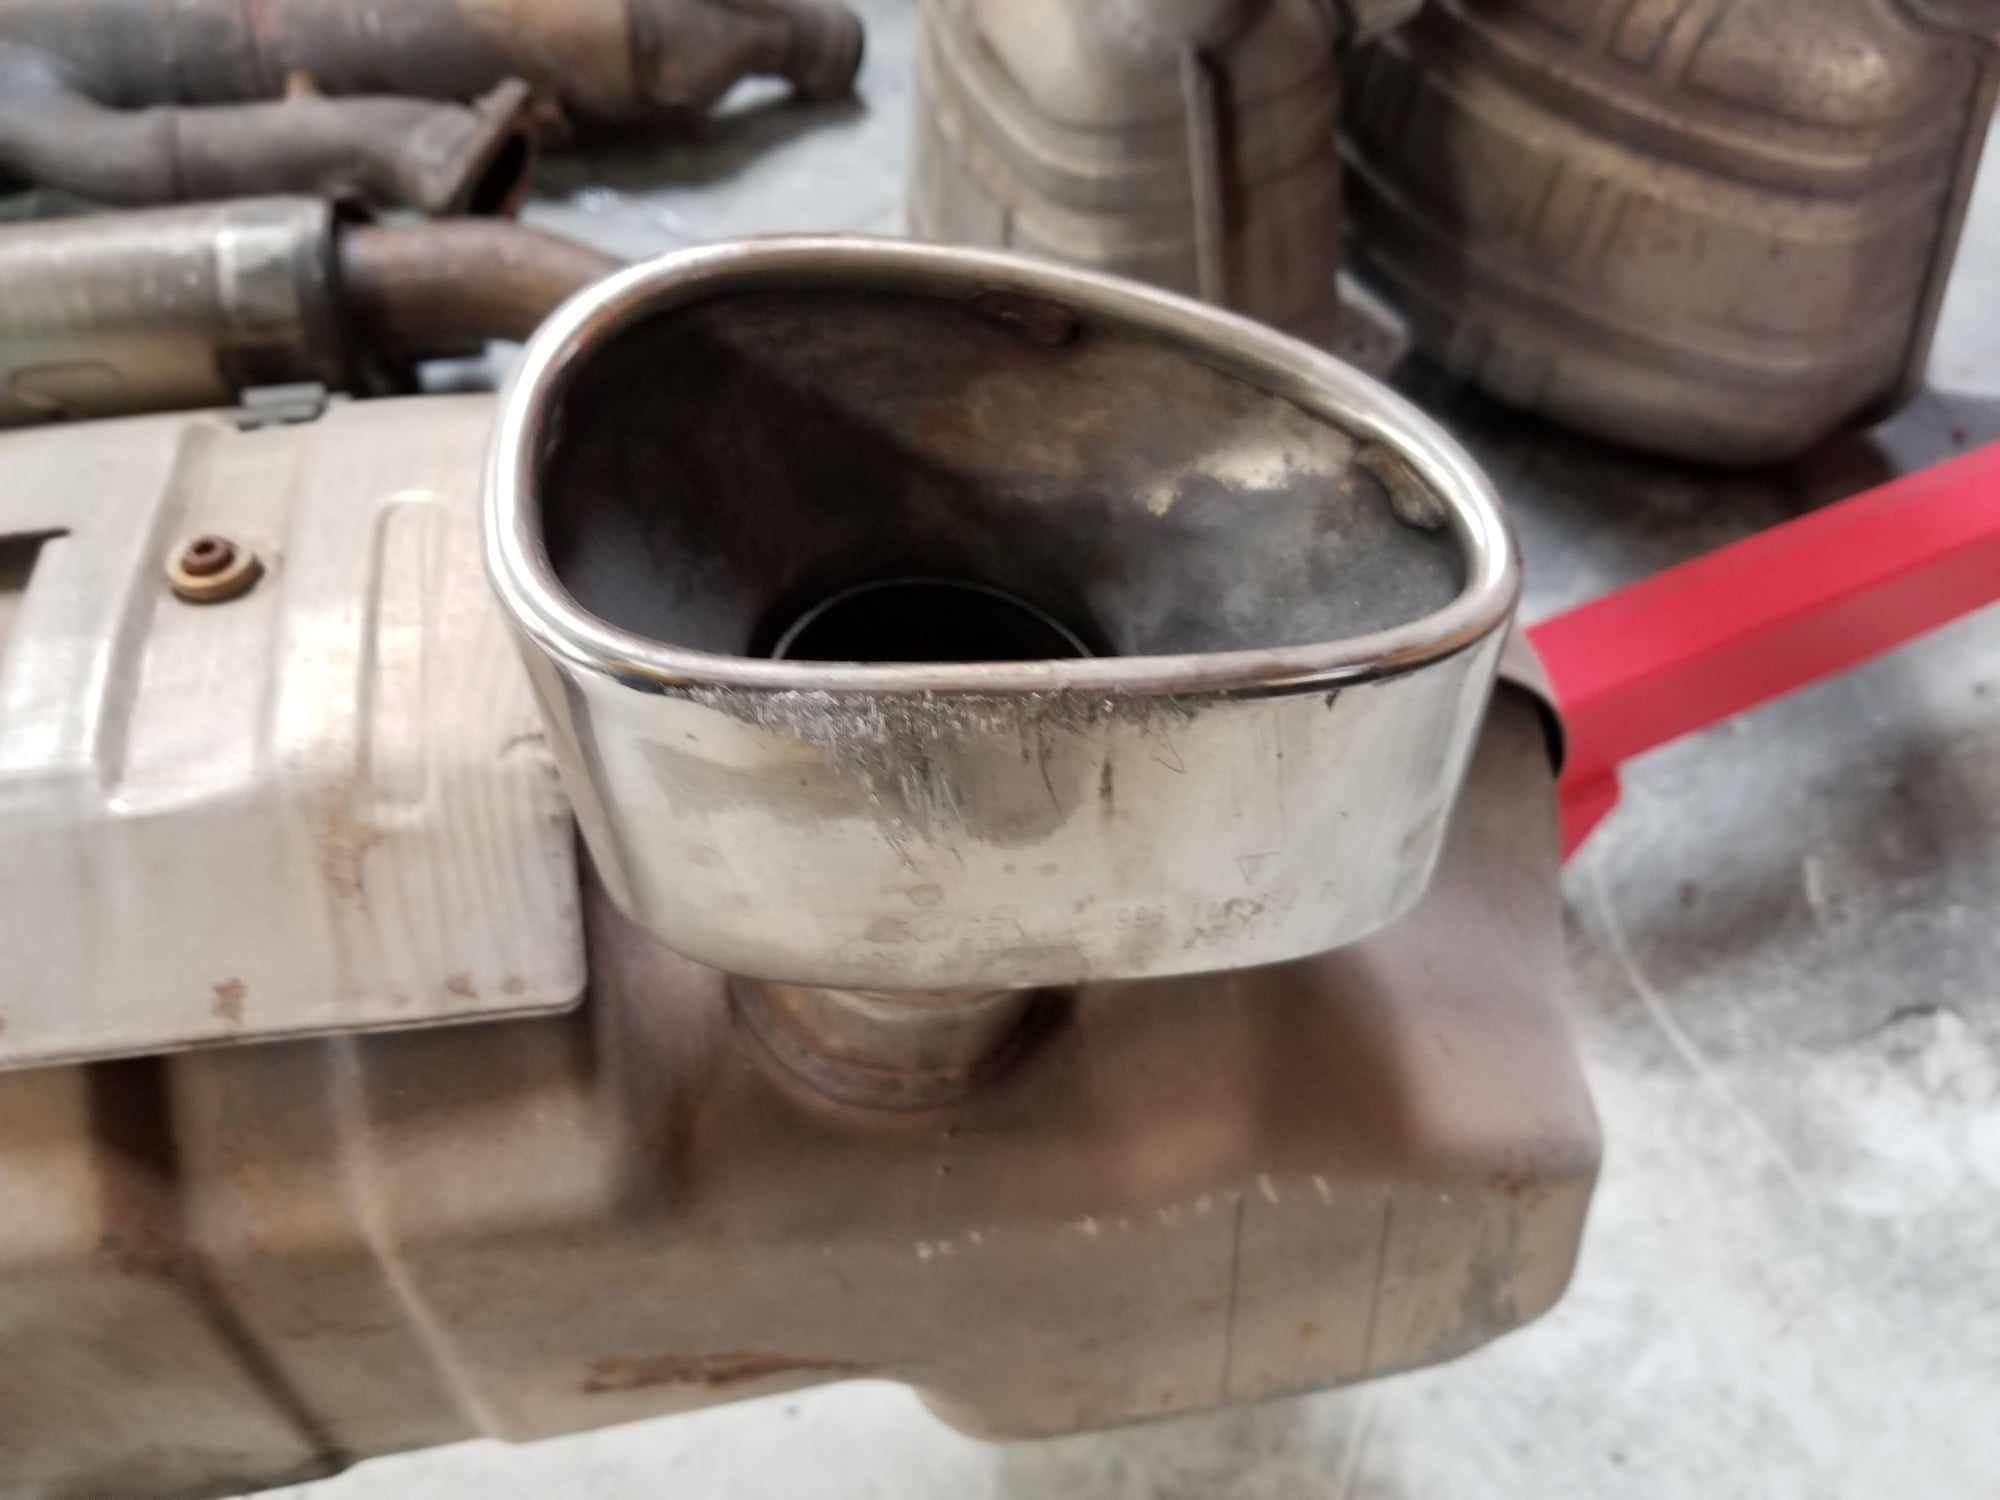 Engine - Exhaust - Shop clean up, various exhaust parts - Used - Houston, TX 77008, United States